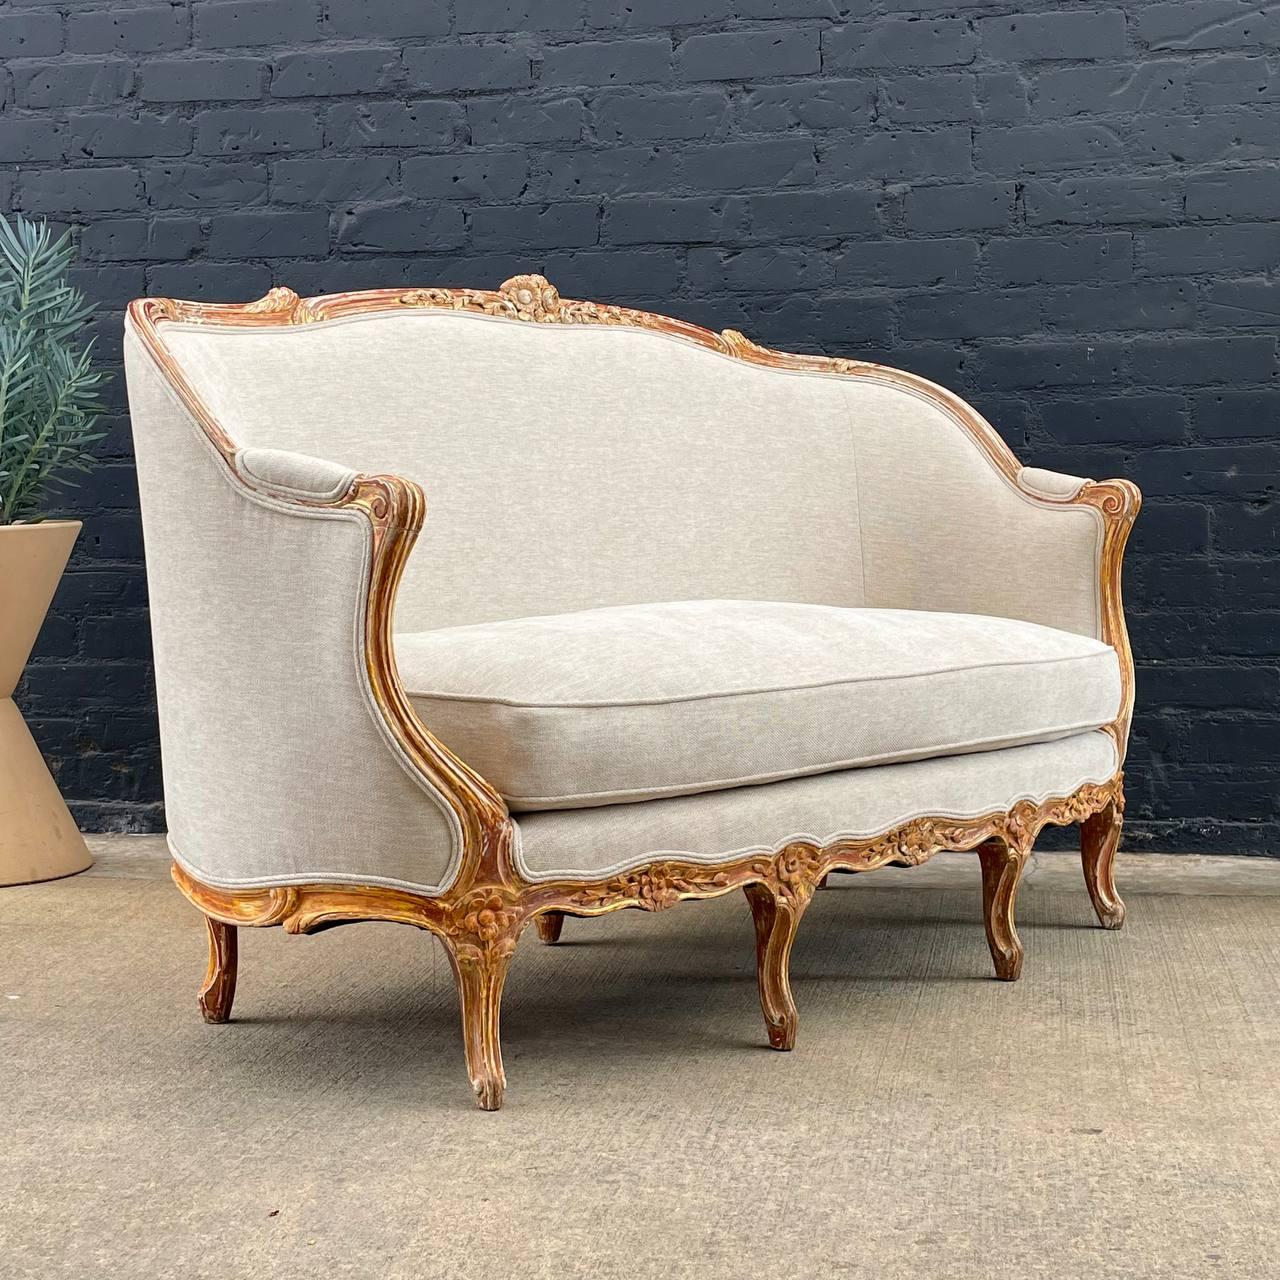 Alpaca Antique French Louis XVI Sofa with Carved Details For Sale